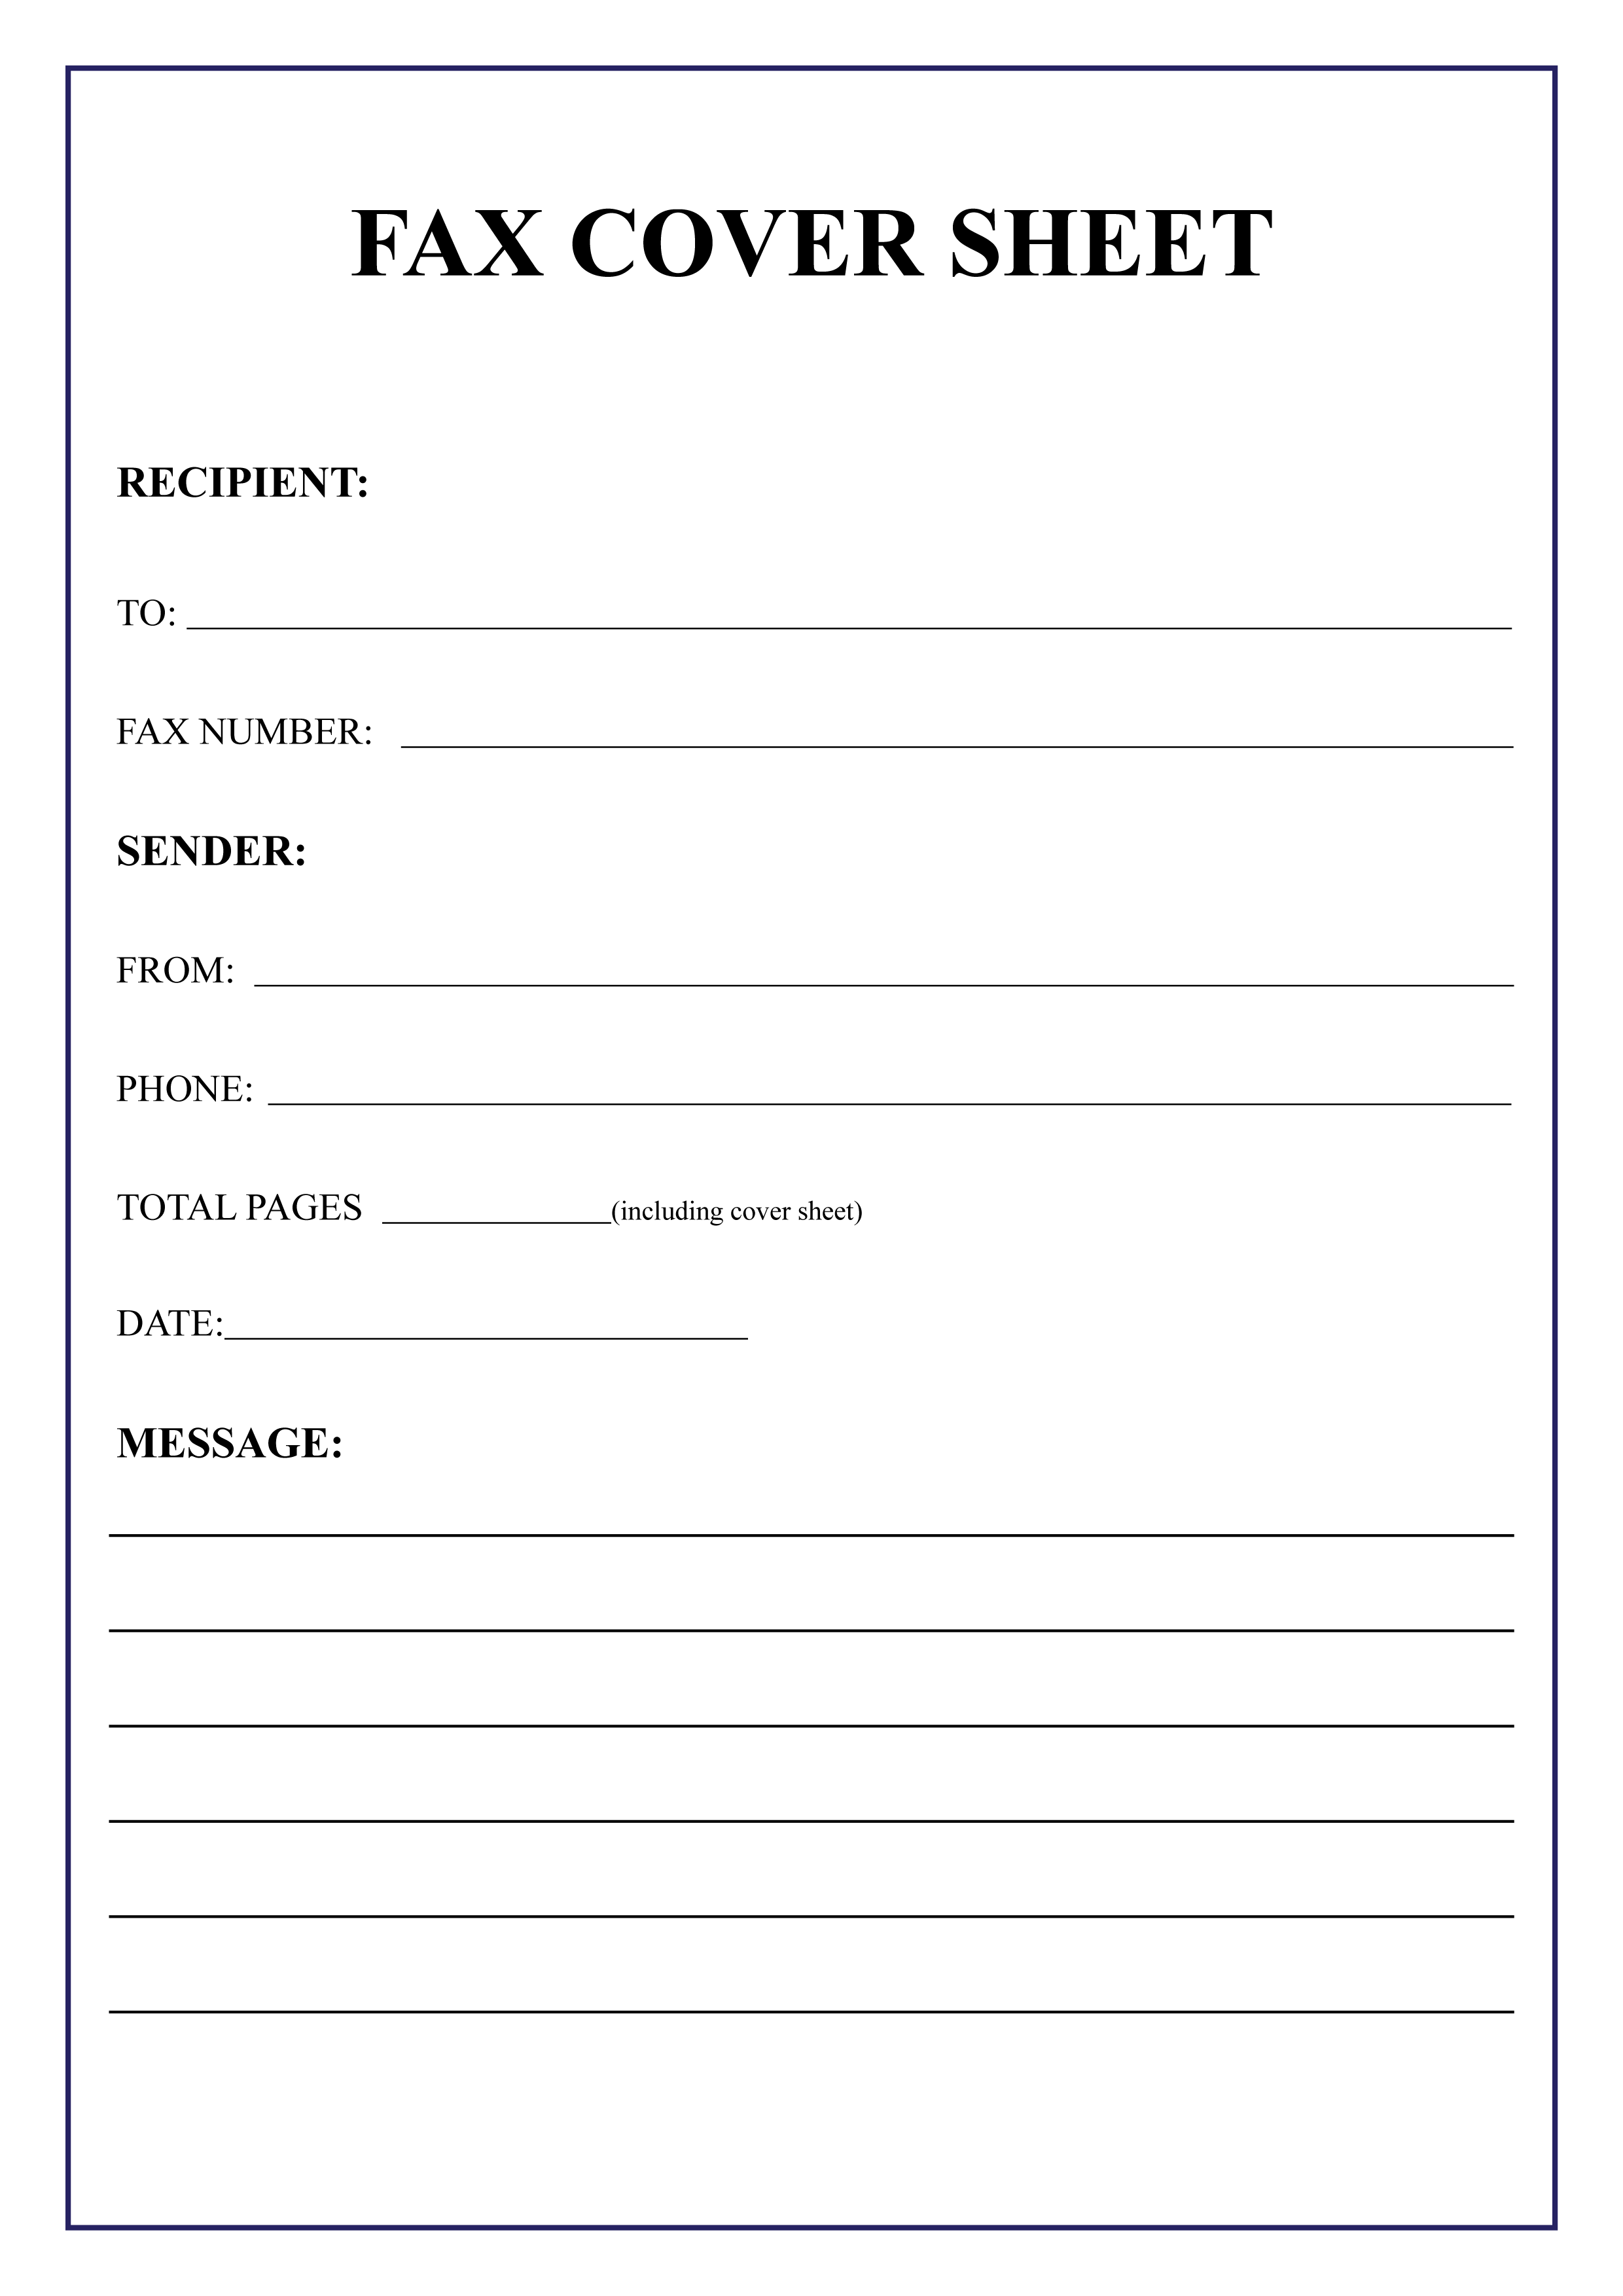 fax cover sheet for resume